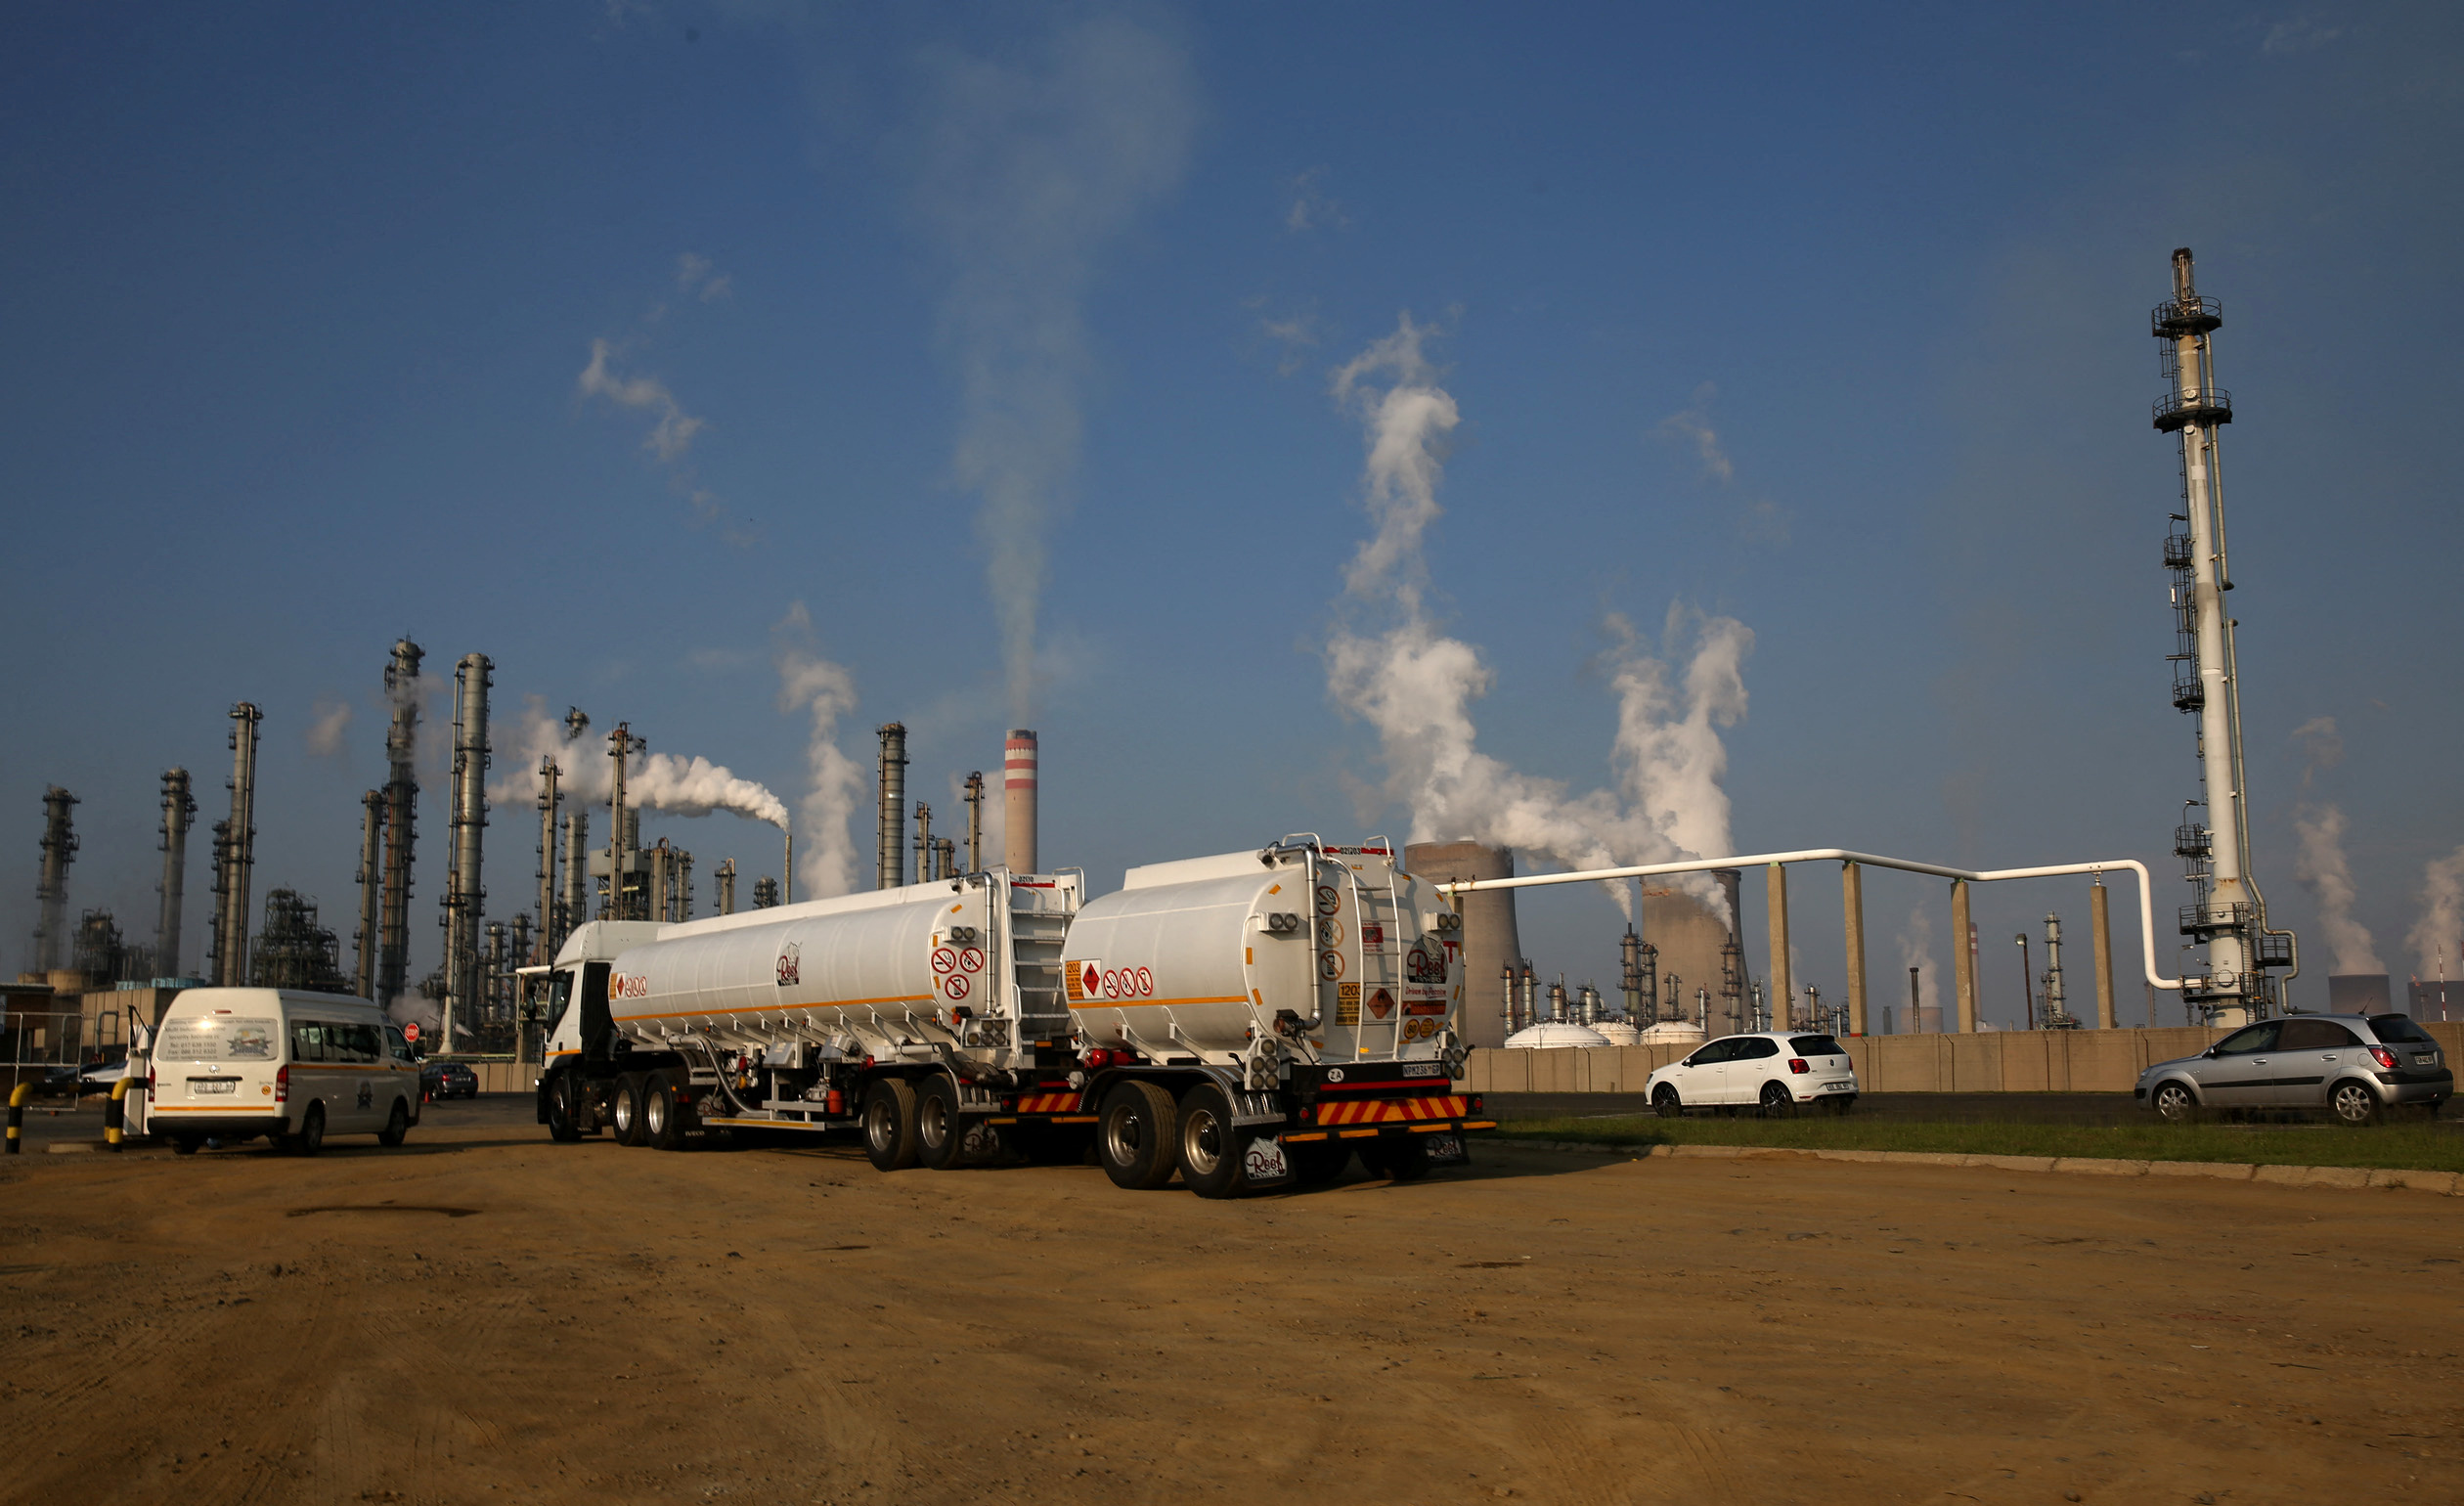 A truck is seen at South African petro-chemical company Sasol's synthetic fuel plant